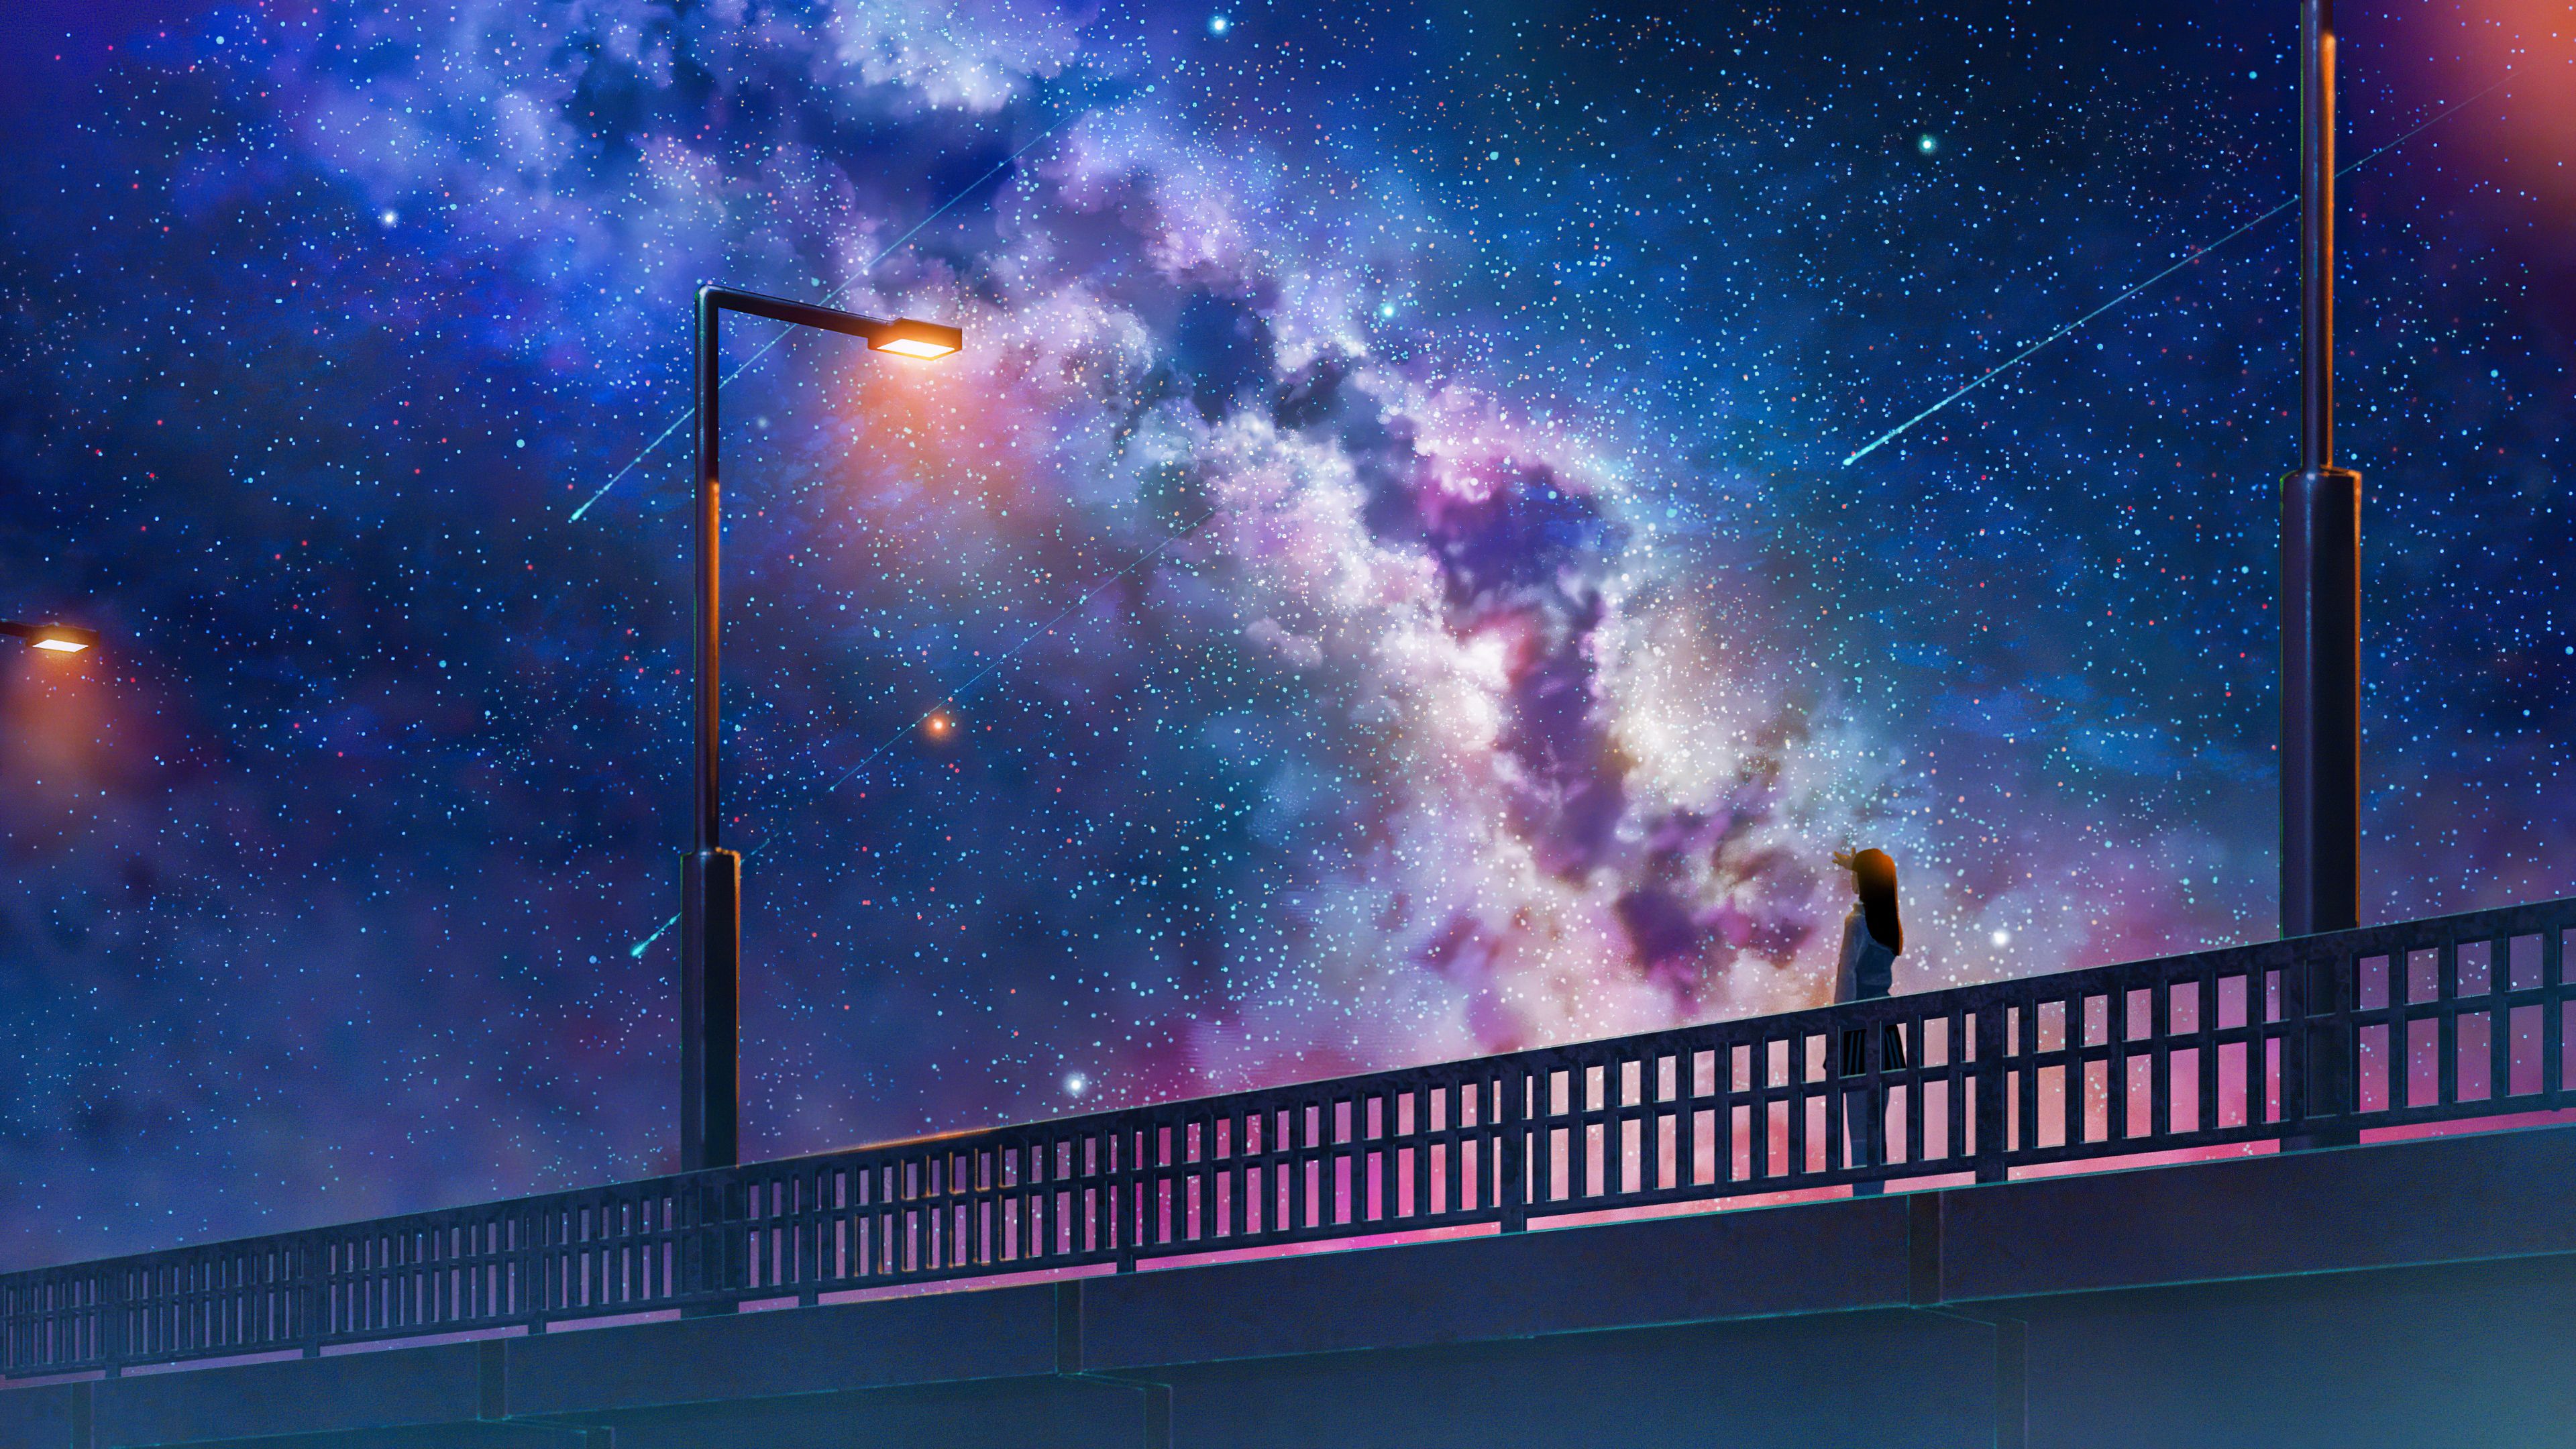 Anime Girl Alone At Bridge Watching The Galaxy Full Of Stars 4k, HD Anime, 4k Wallpaper, Image, Background, Photo and Picture